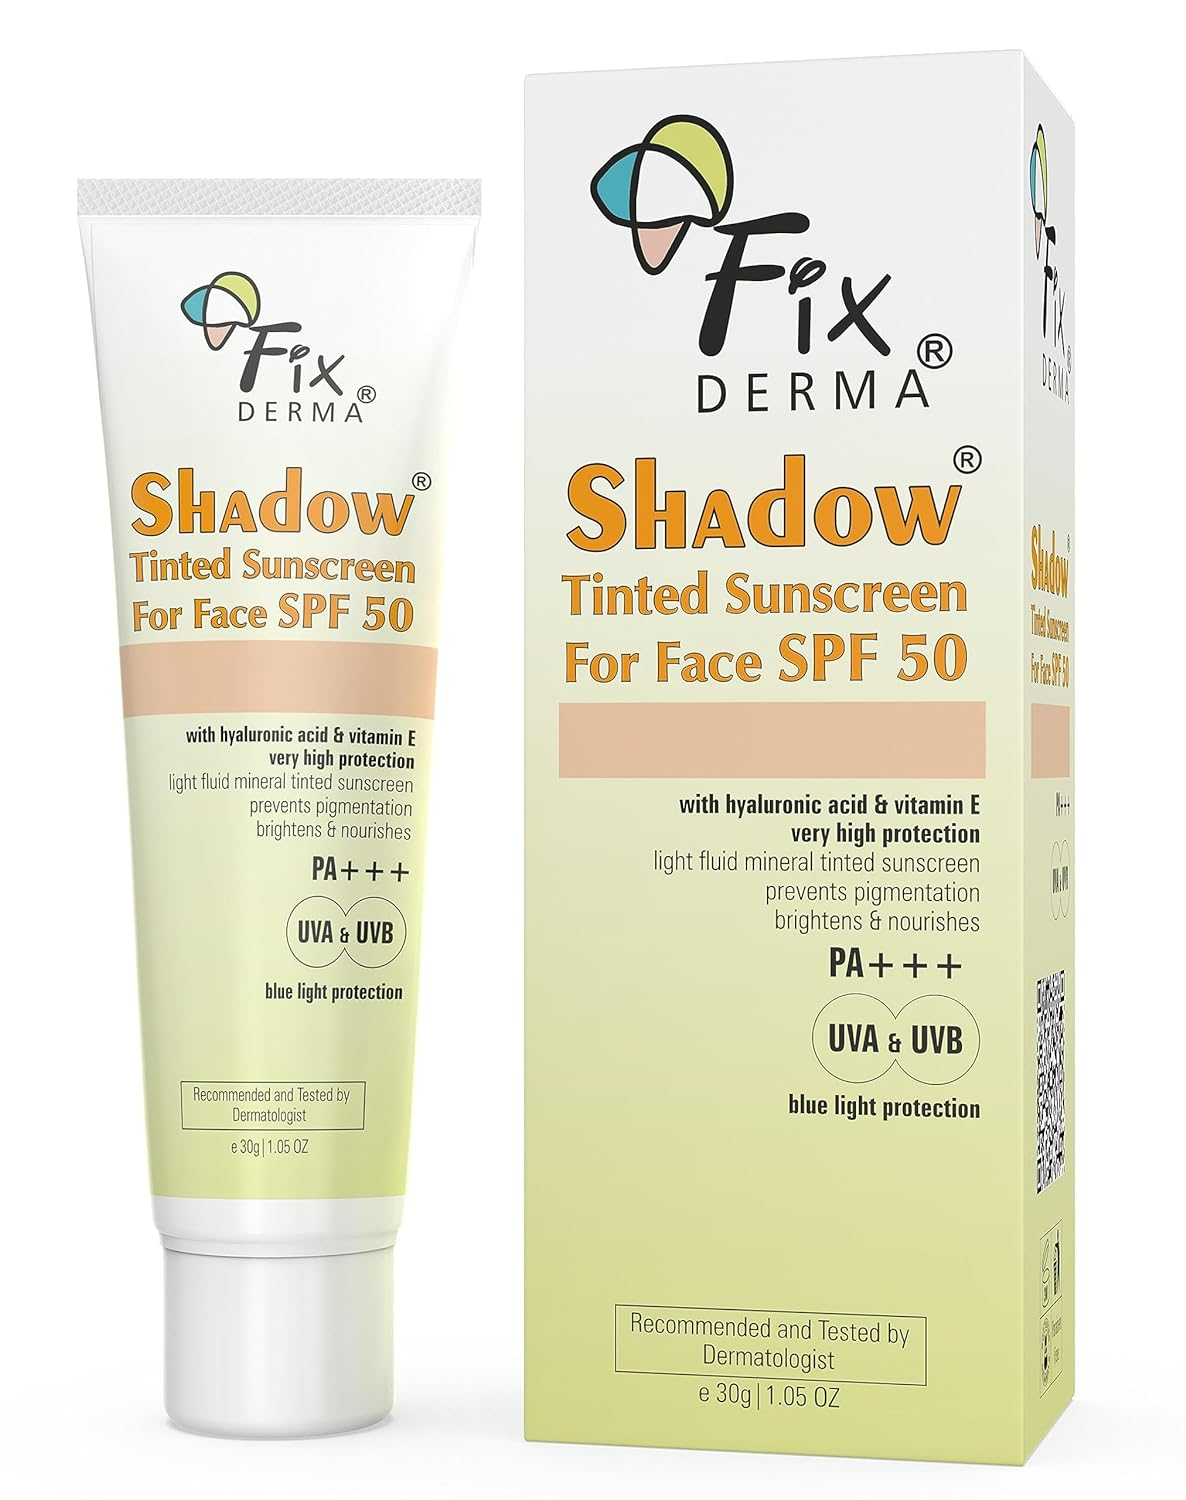 Fixderma Shadow Rx Tinted Sunscreen